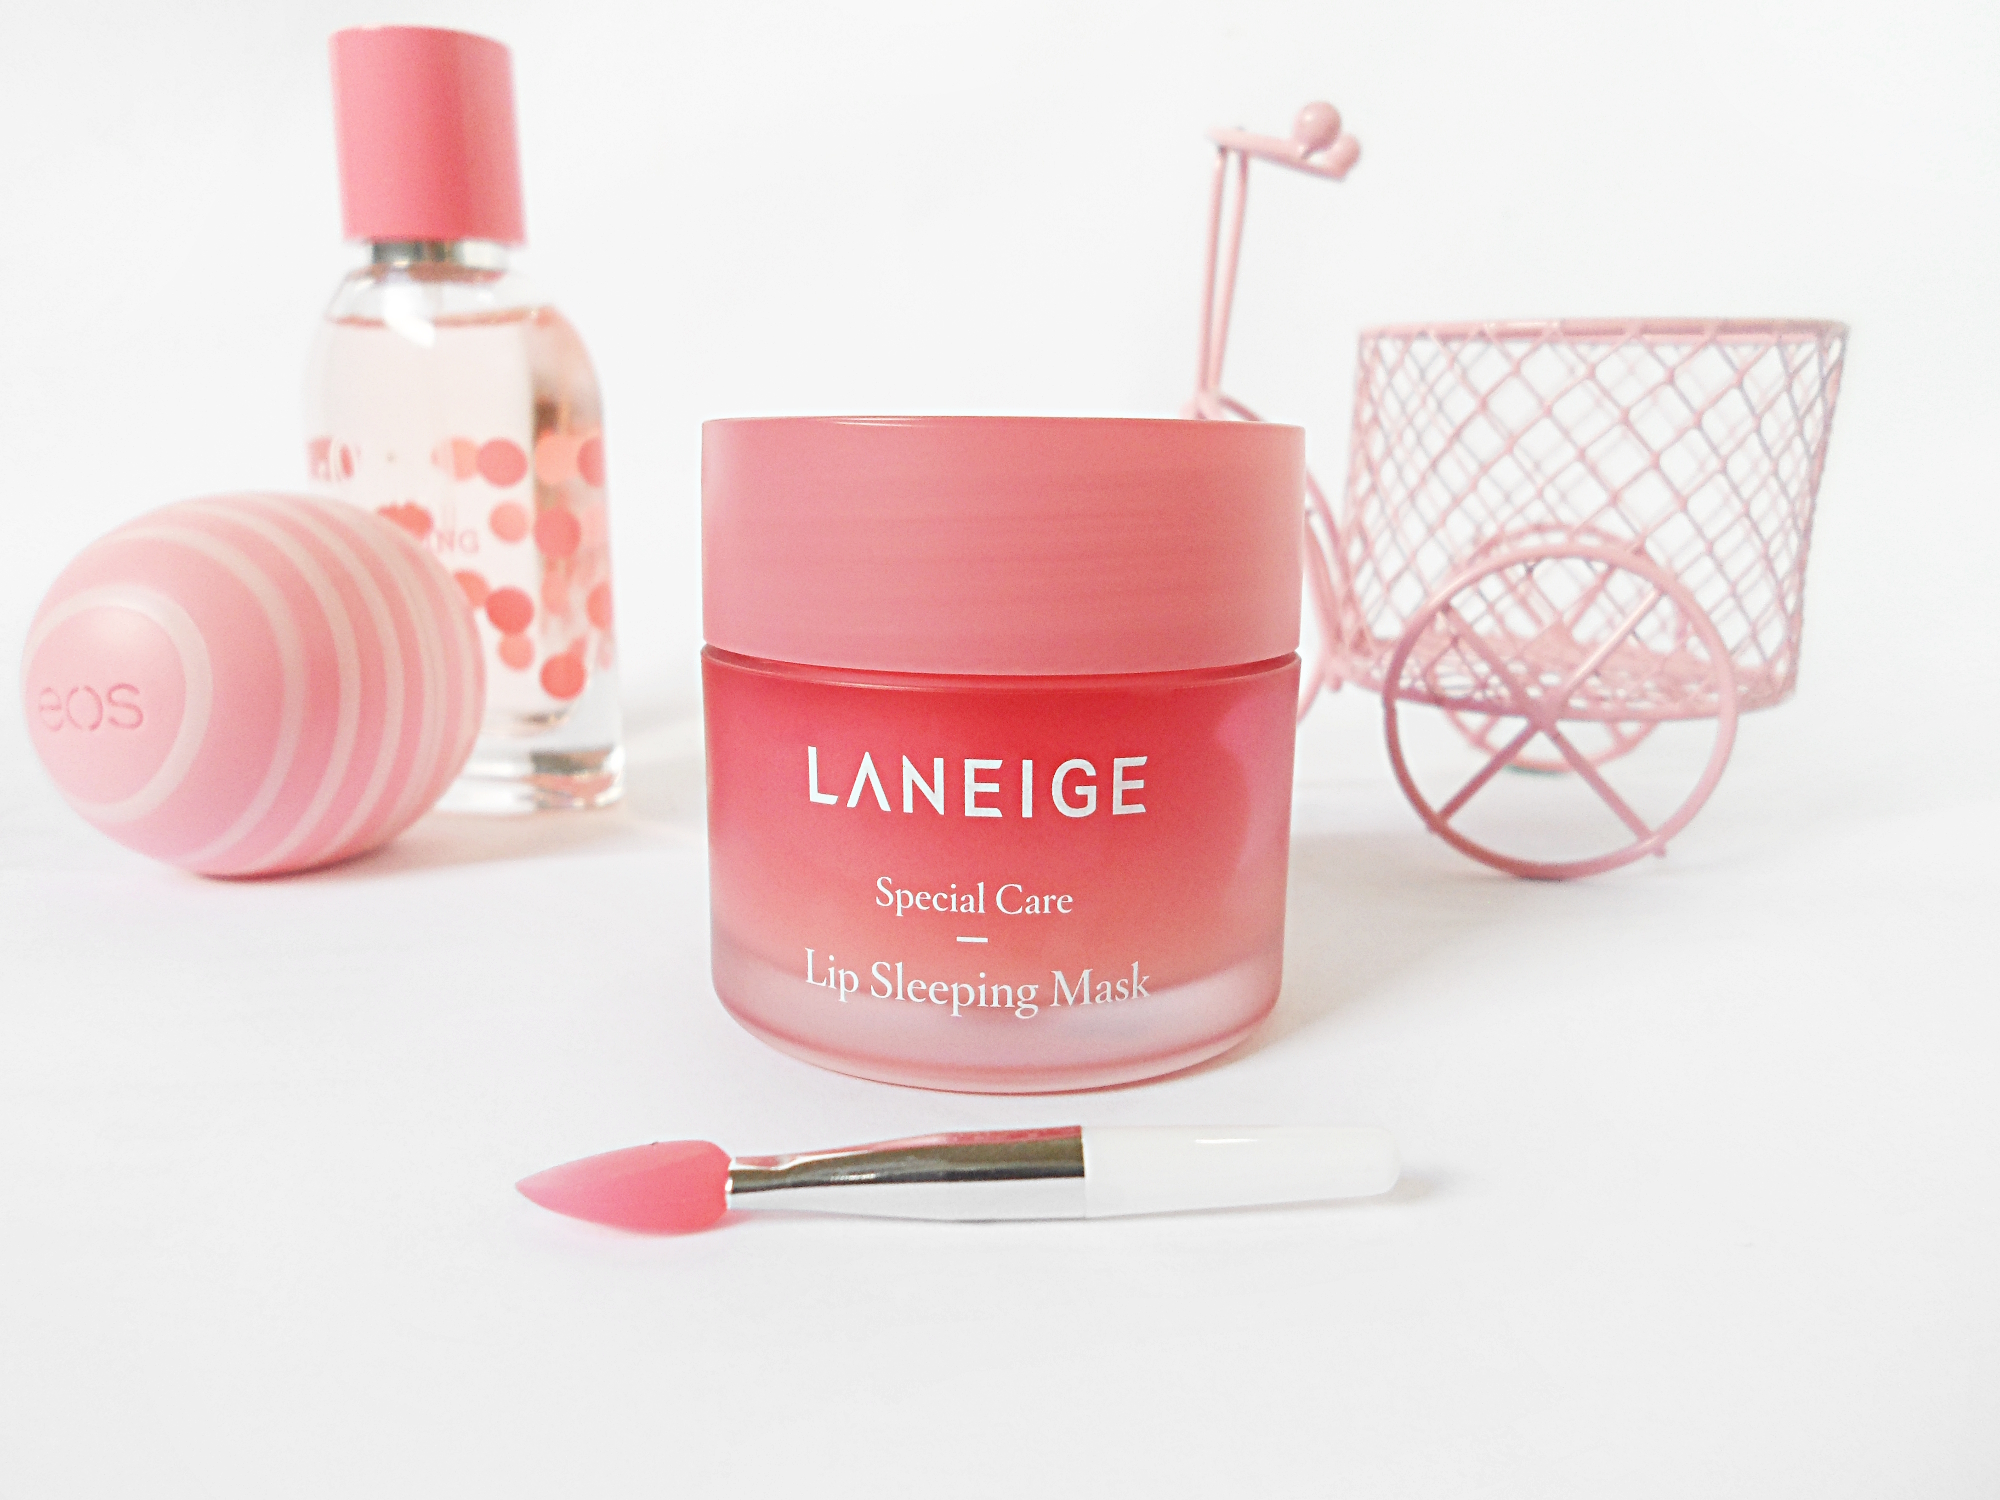 a close-up of a lip care mask by laneige brand laying on a white background in a studio